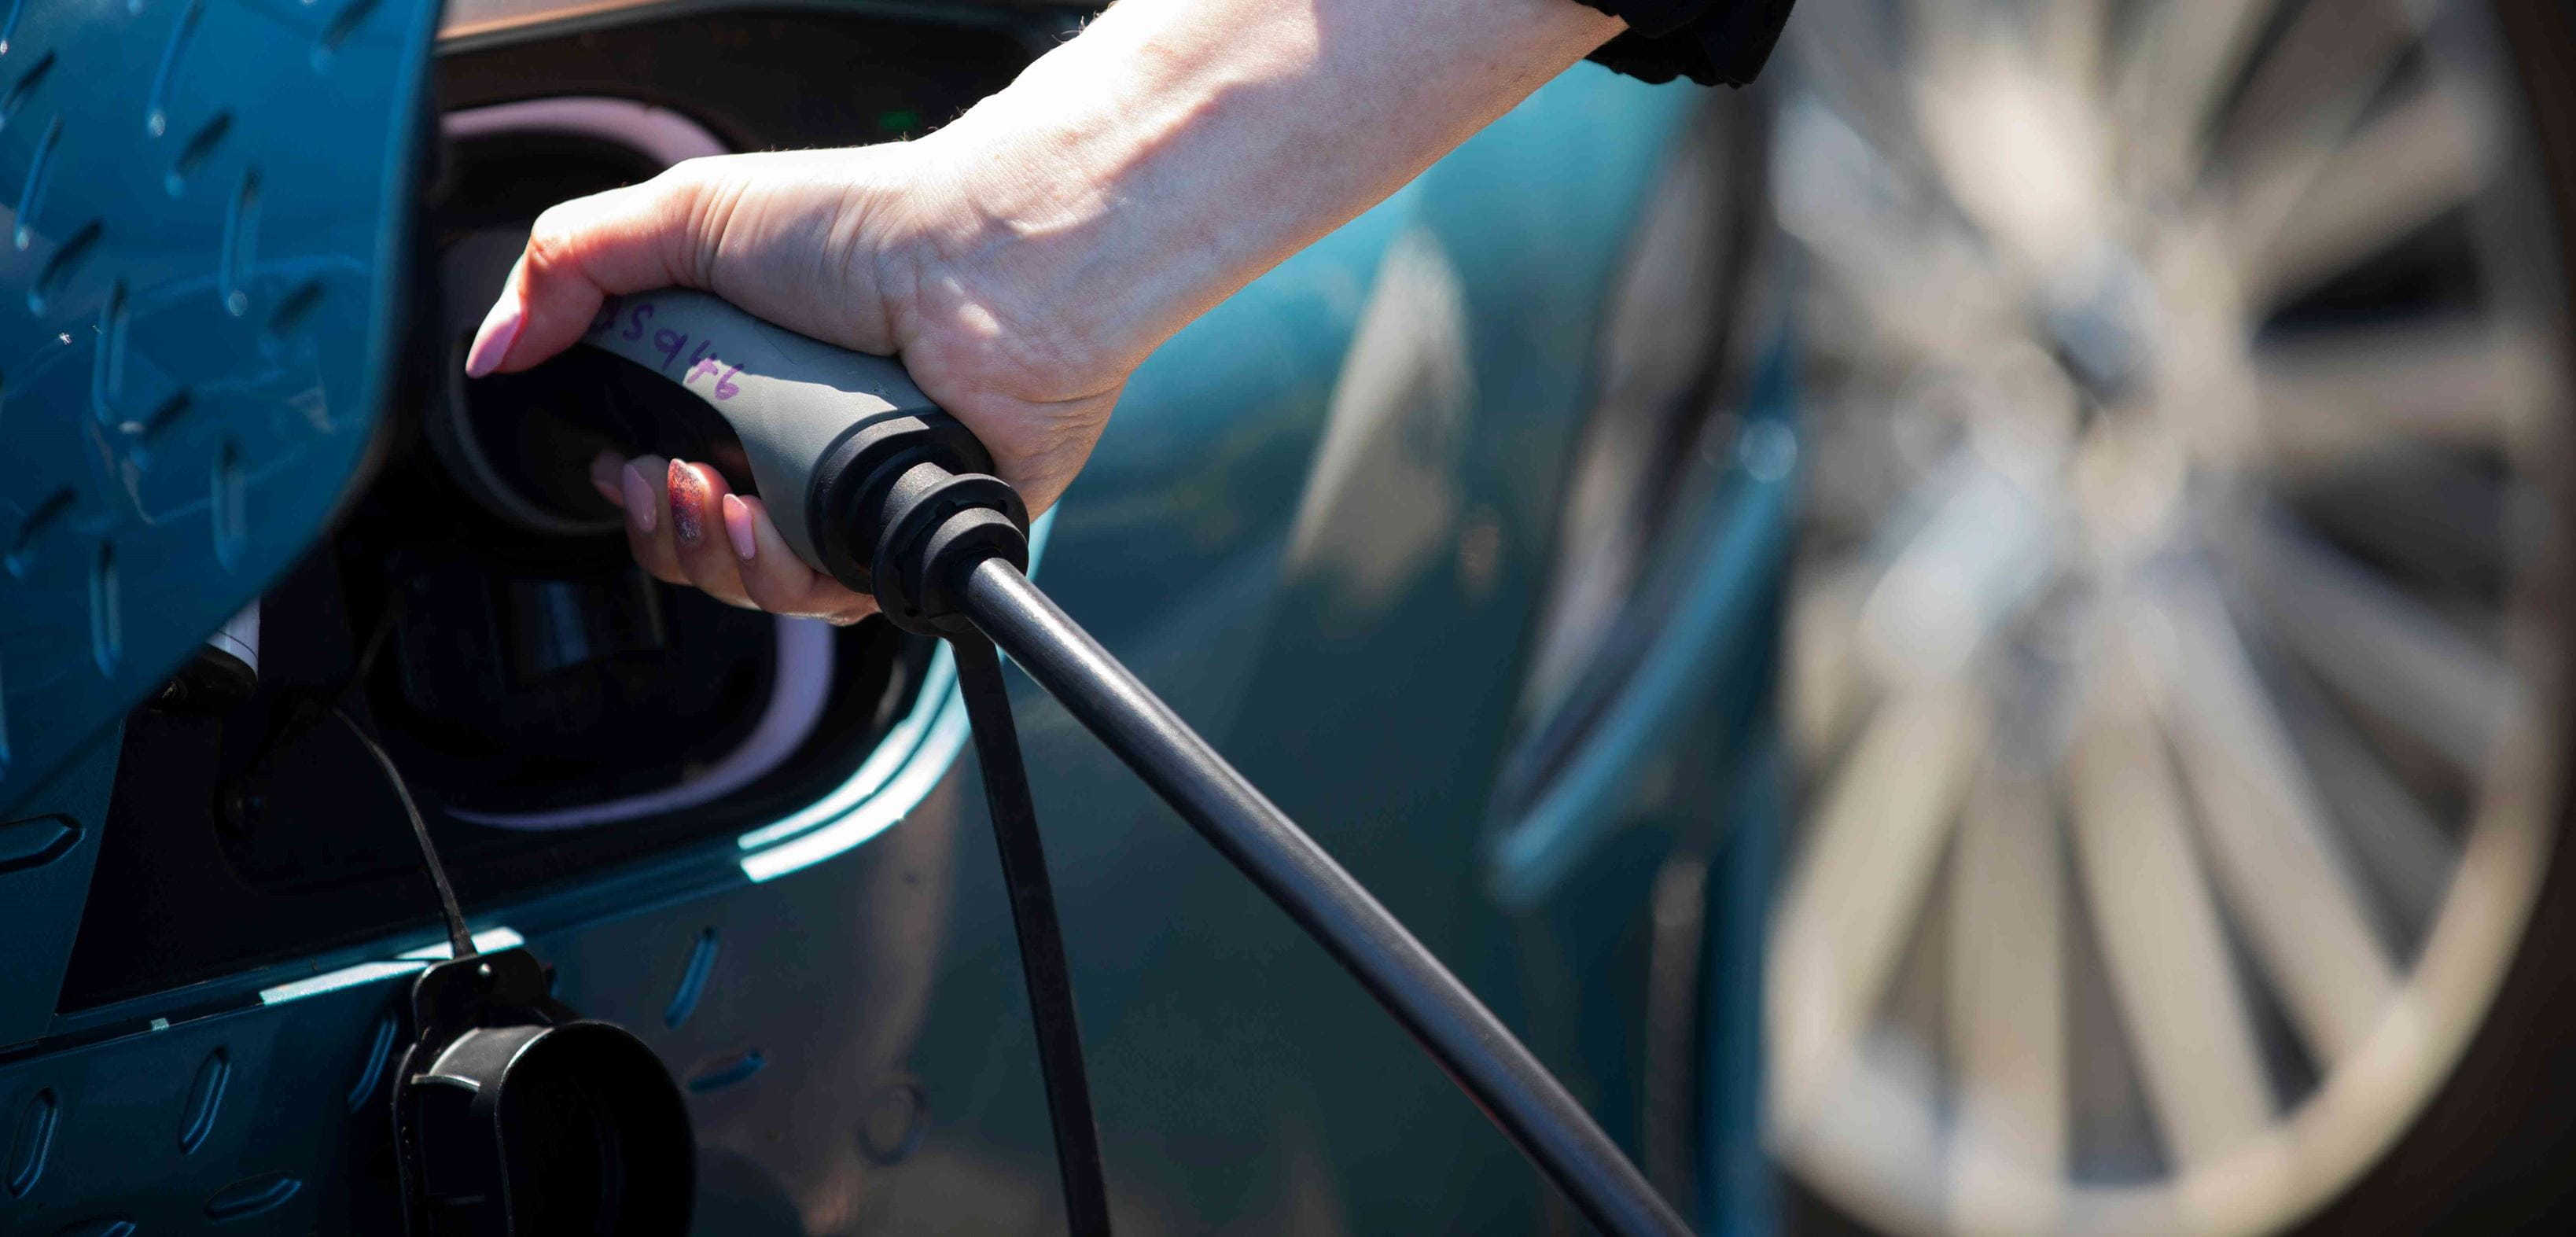 Close up of a male hand holding EV charging cable plugged into an electric vehicle